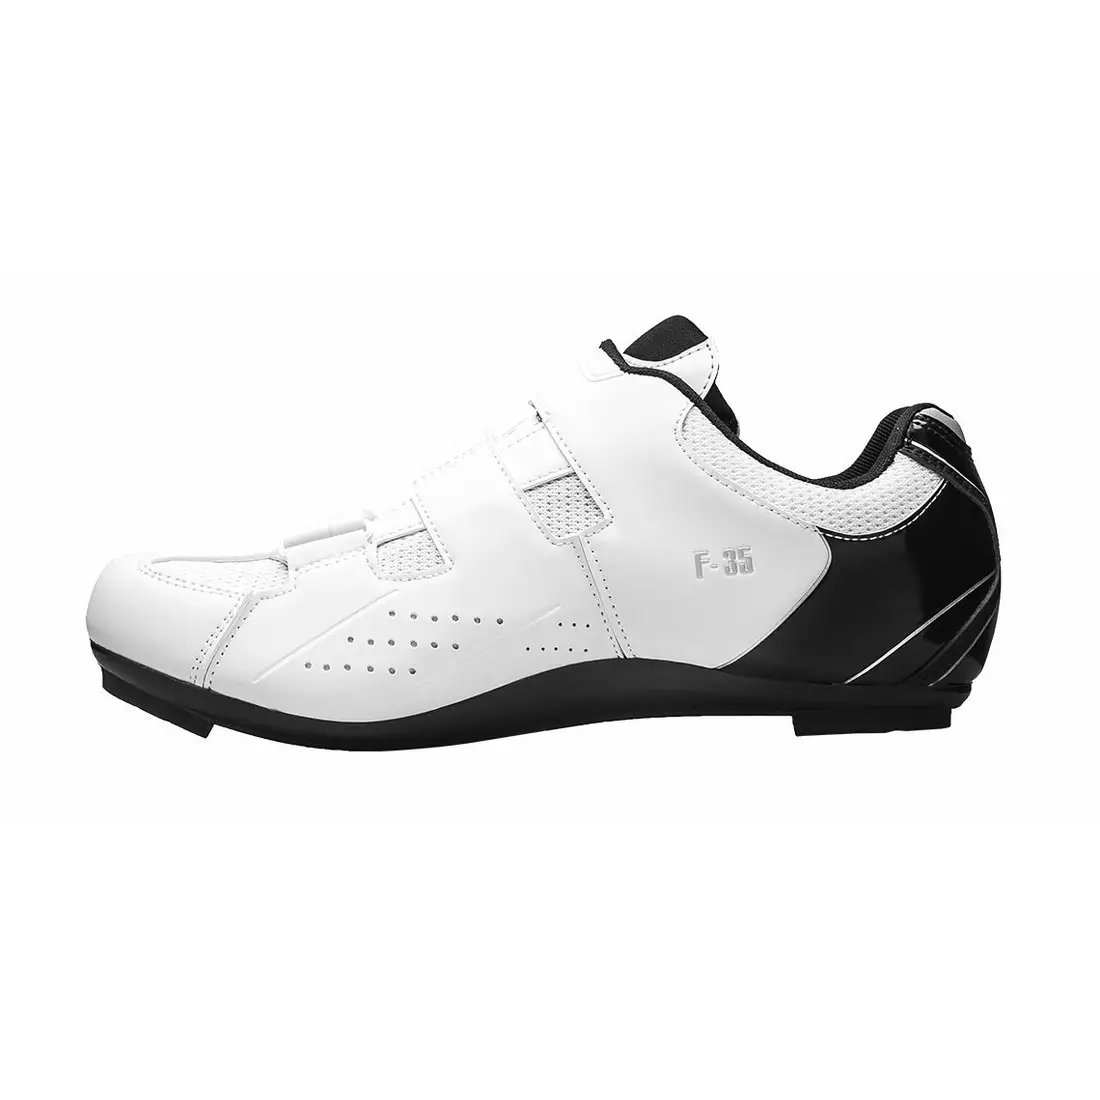 FLR F-35 bicycle shoes, white